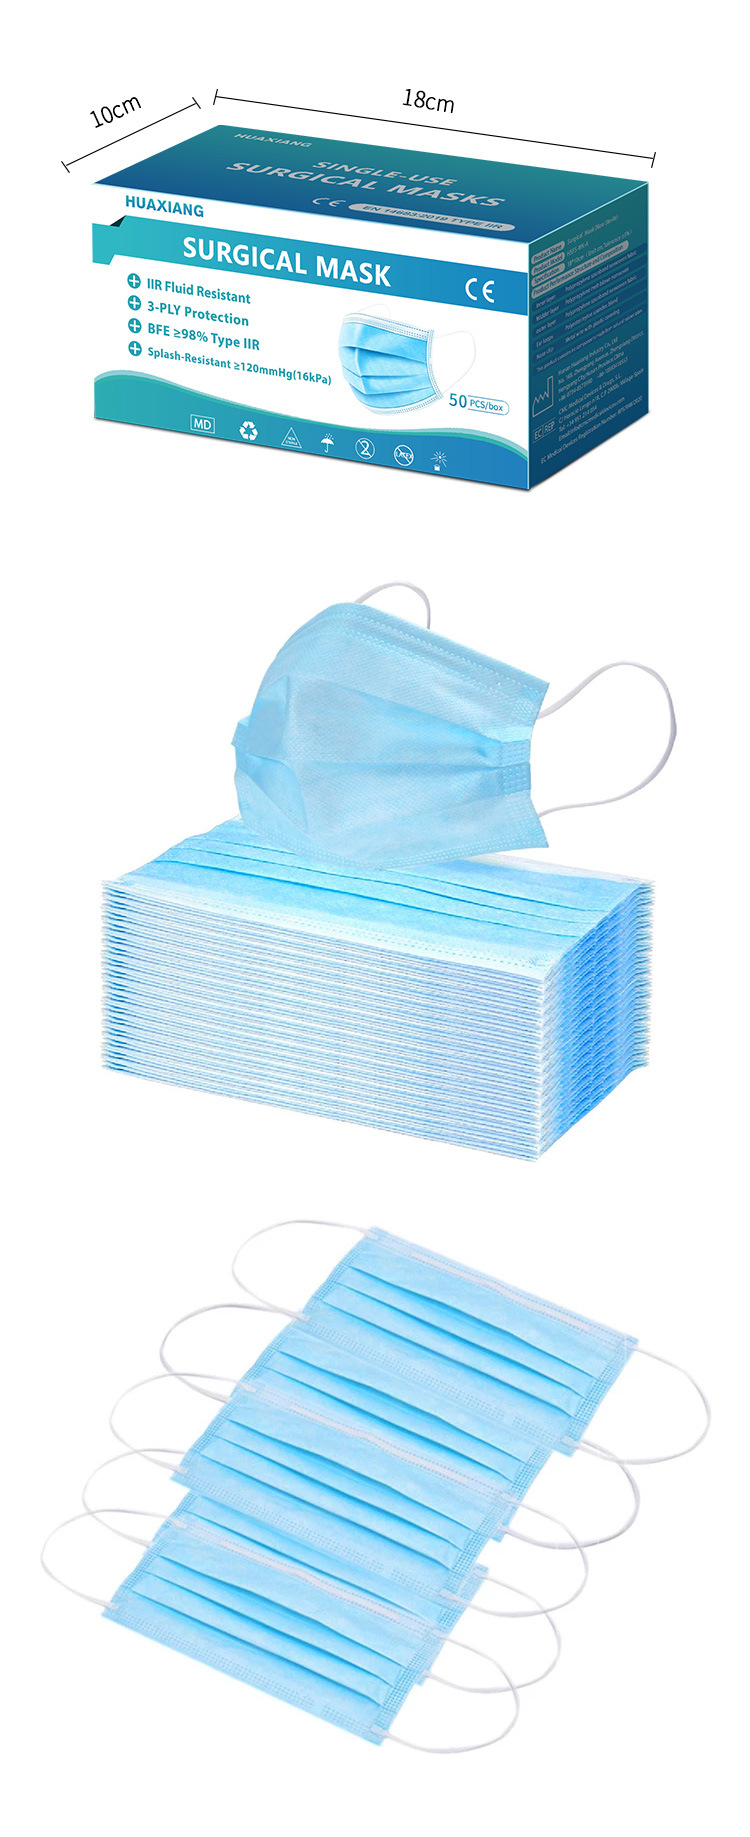 Disposable Surgical Face Mask for Medical Operation Room and Environment with Registration Type2r with Ce Registration